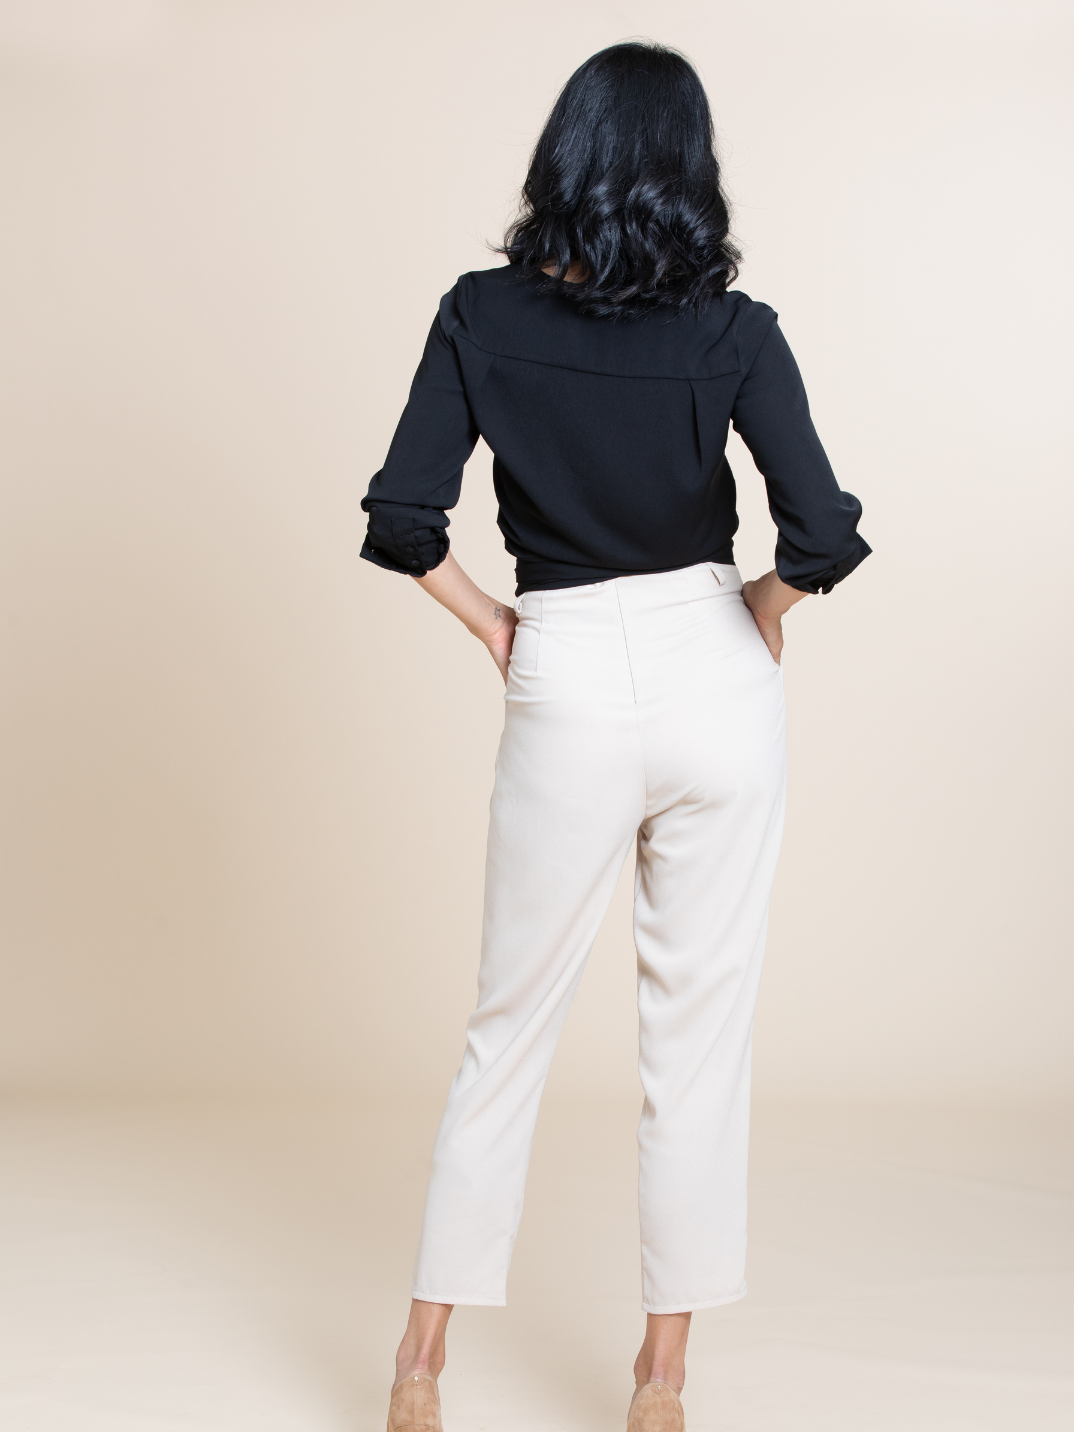 A wardrobe must have. The Alexa wrap top is a versatile and ultra-stylish piece that is an instant outfit elevator. Dressing up? Wear with our Lexi trousers or Marnie skirt for a chic, office-ready look. Dressing down? Swap the heels out for sneaks and throw on a pair of jeans. Available in white, olive green, and black.